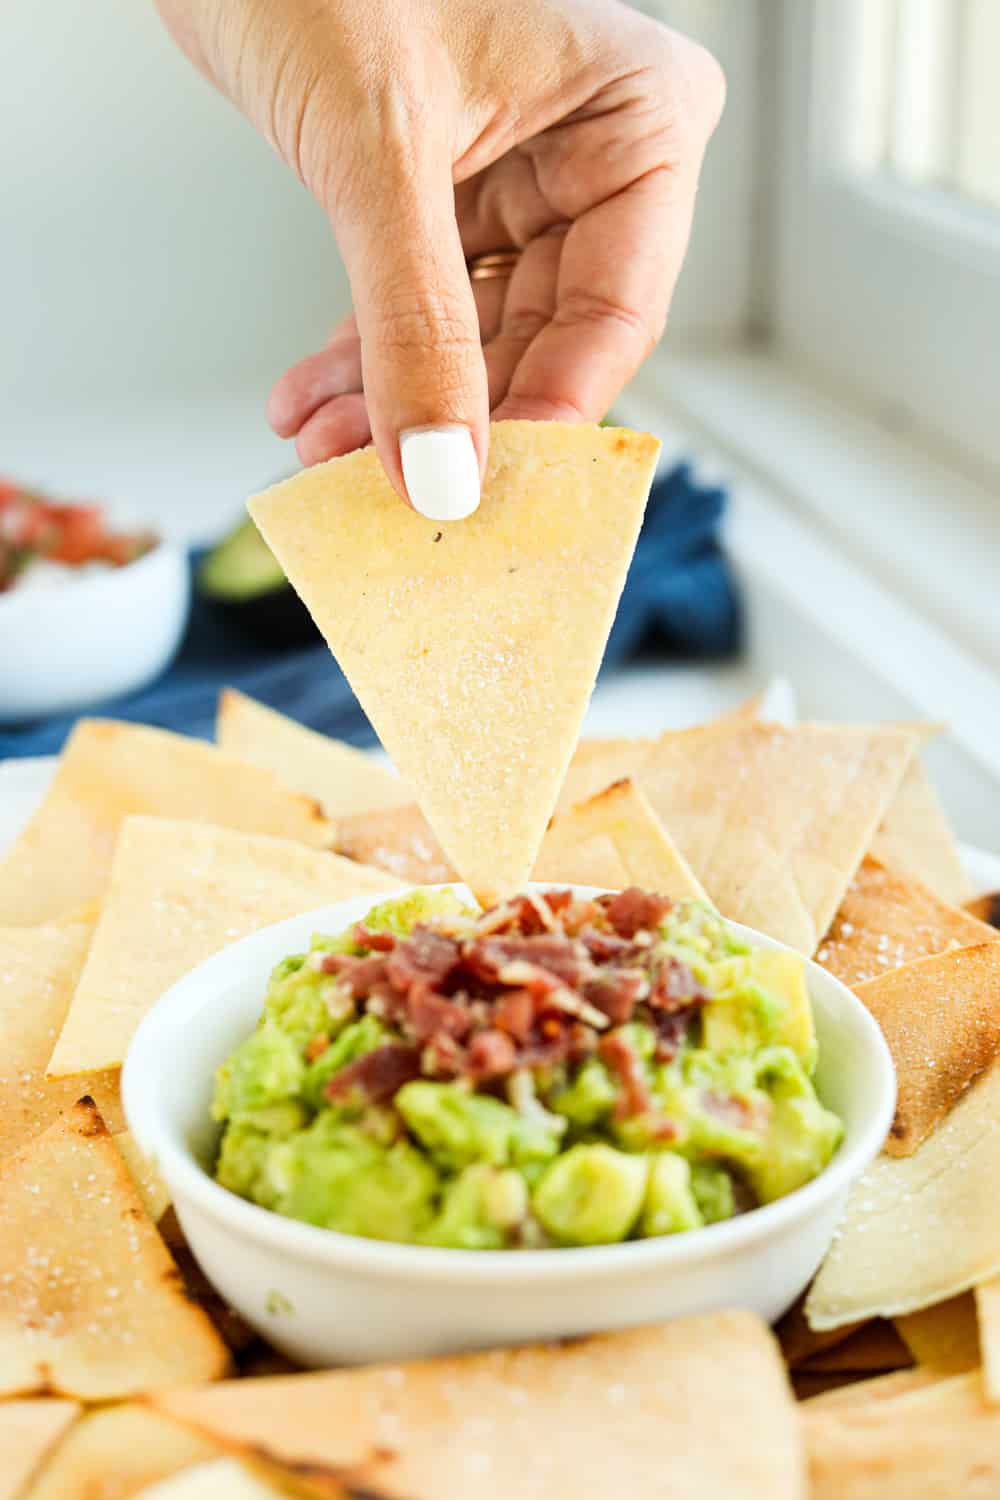 A tortilla chip just about to be dipped into guacamole.